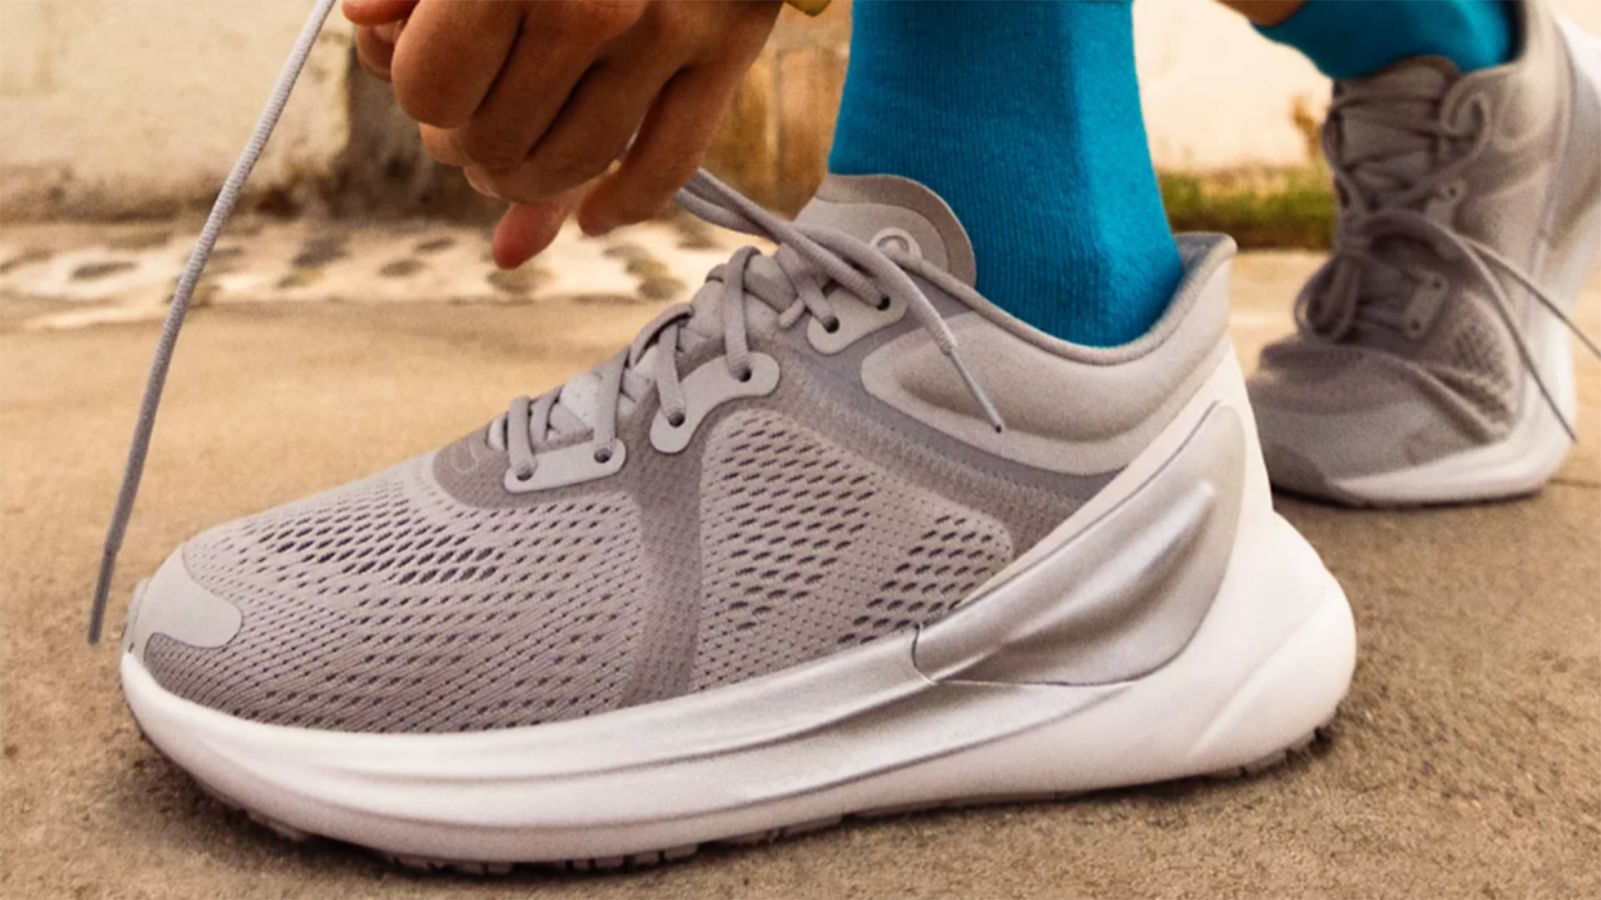 Lululemon Blissfeel review: We tried the brand’s first running shoe